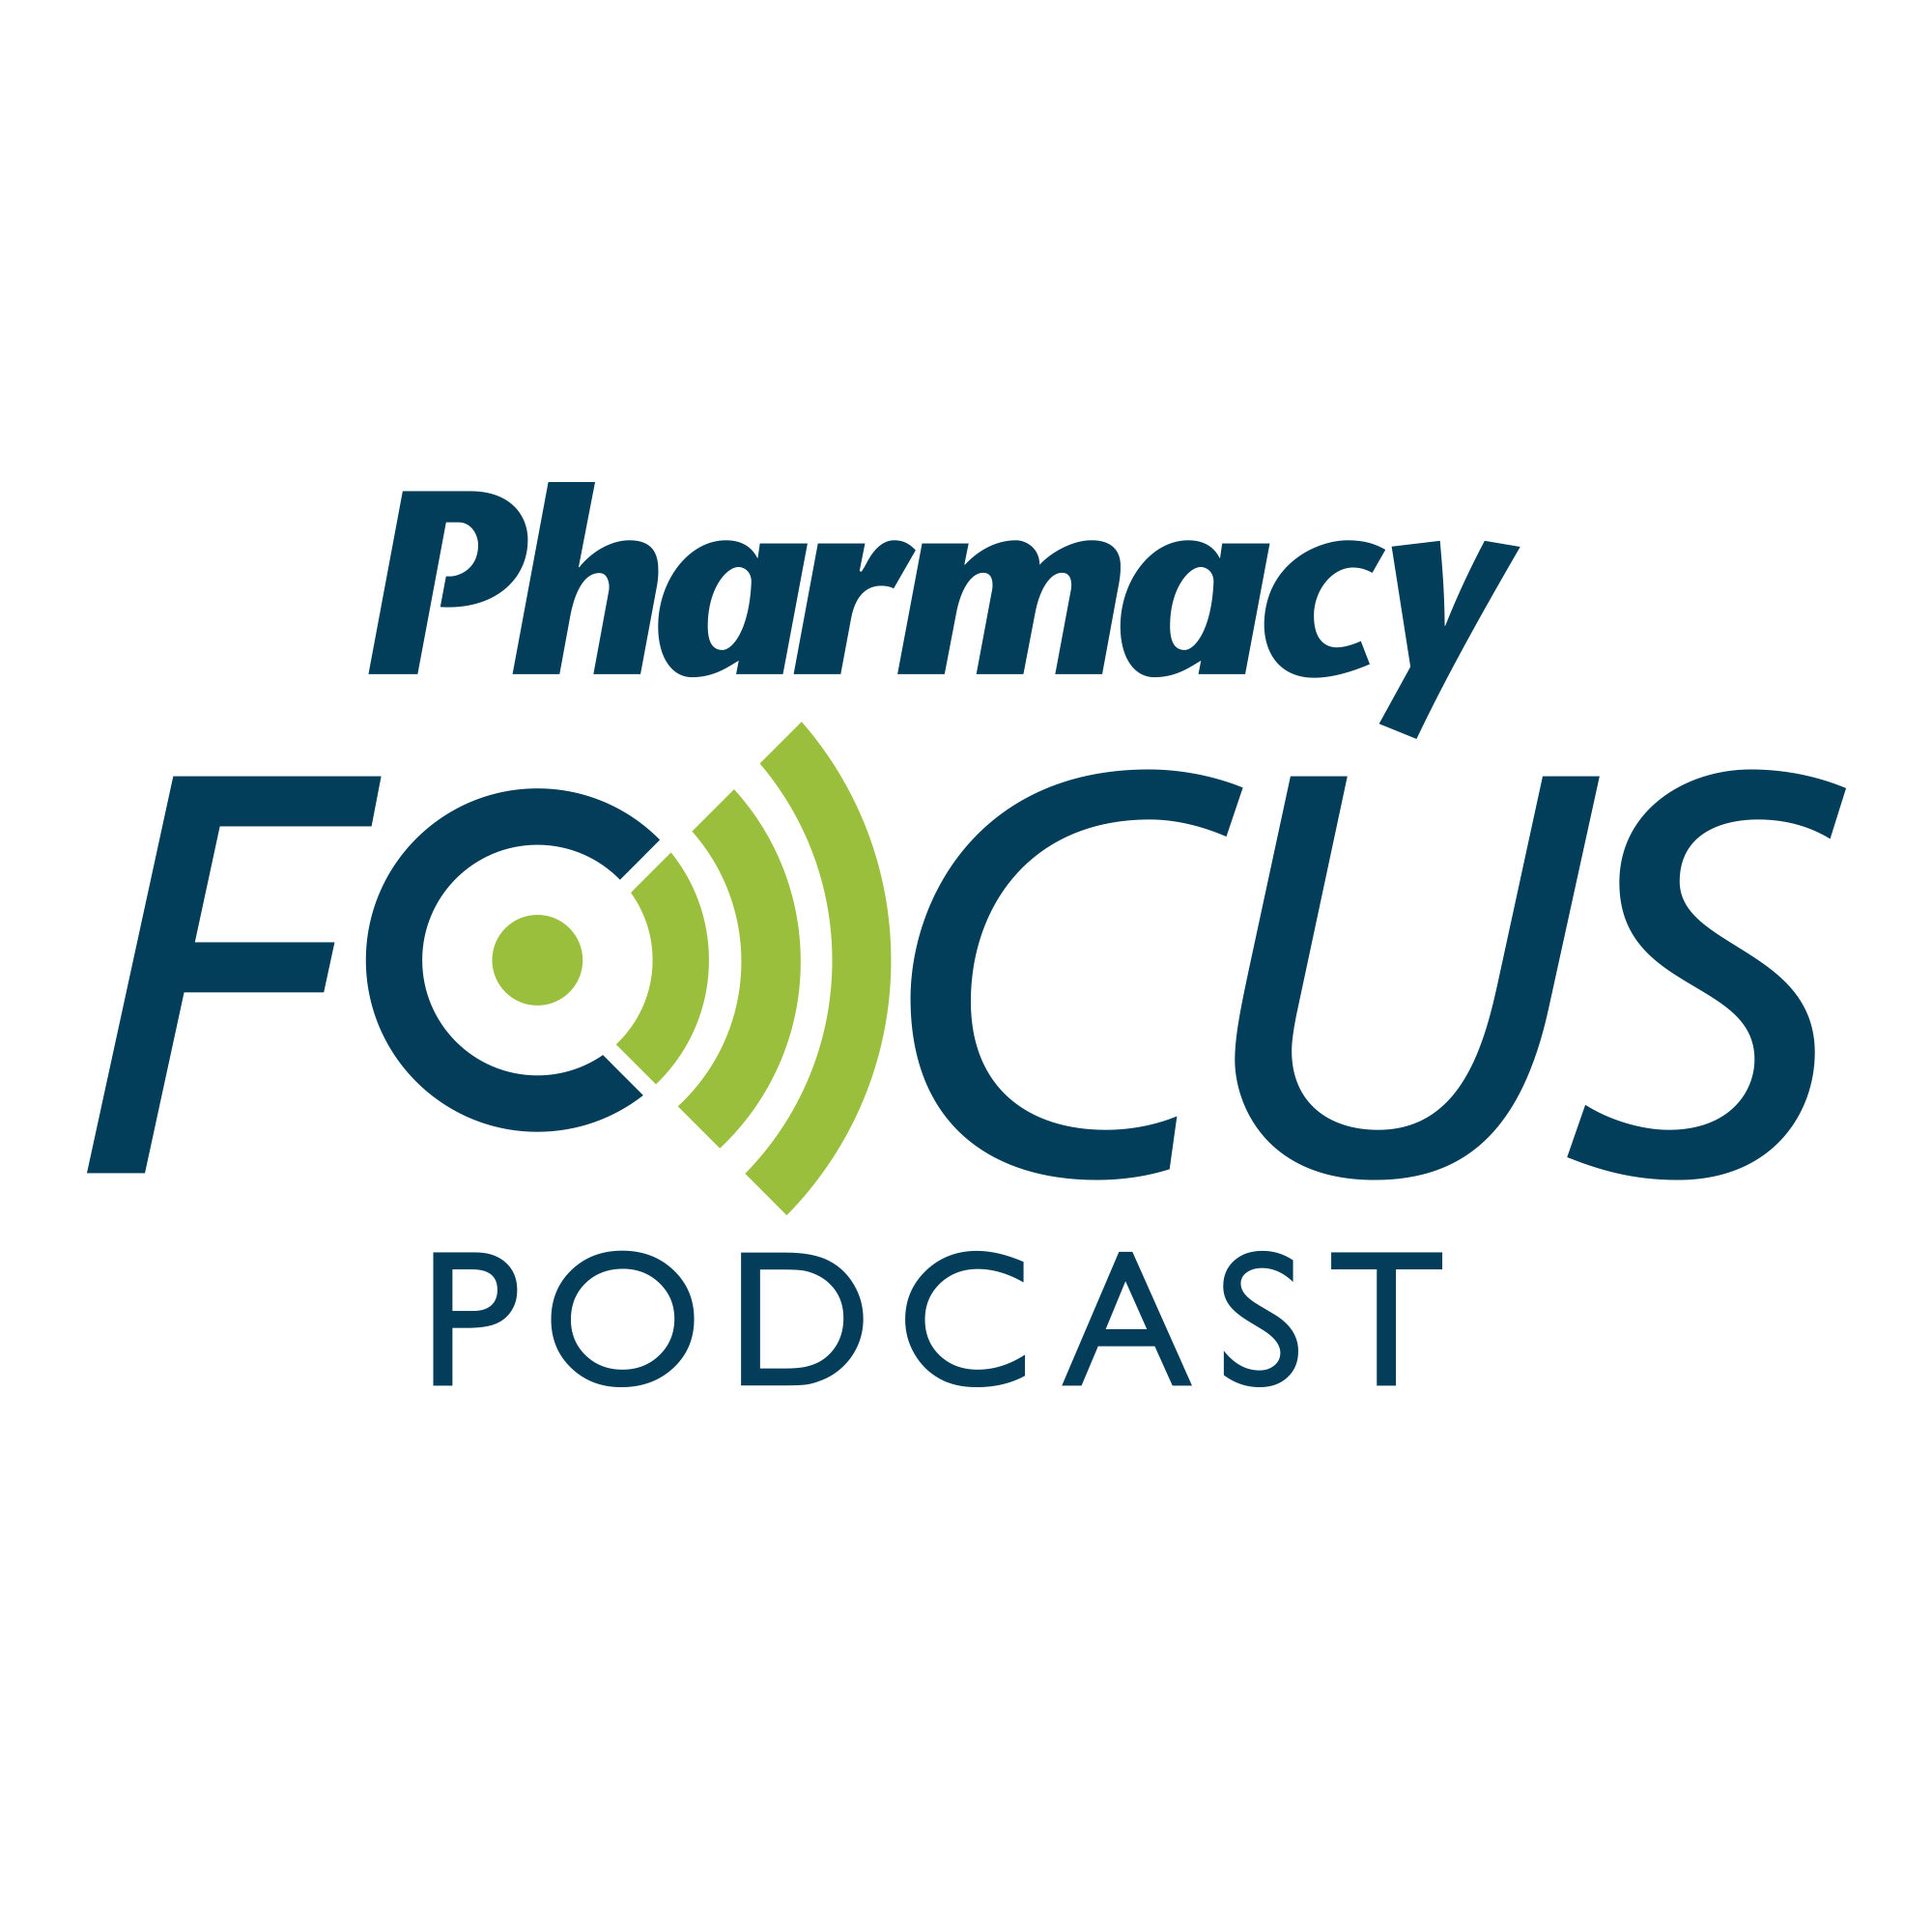 Pharmacy Focus Episode 11: Dealing With a Pandemic in Pharmacy School